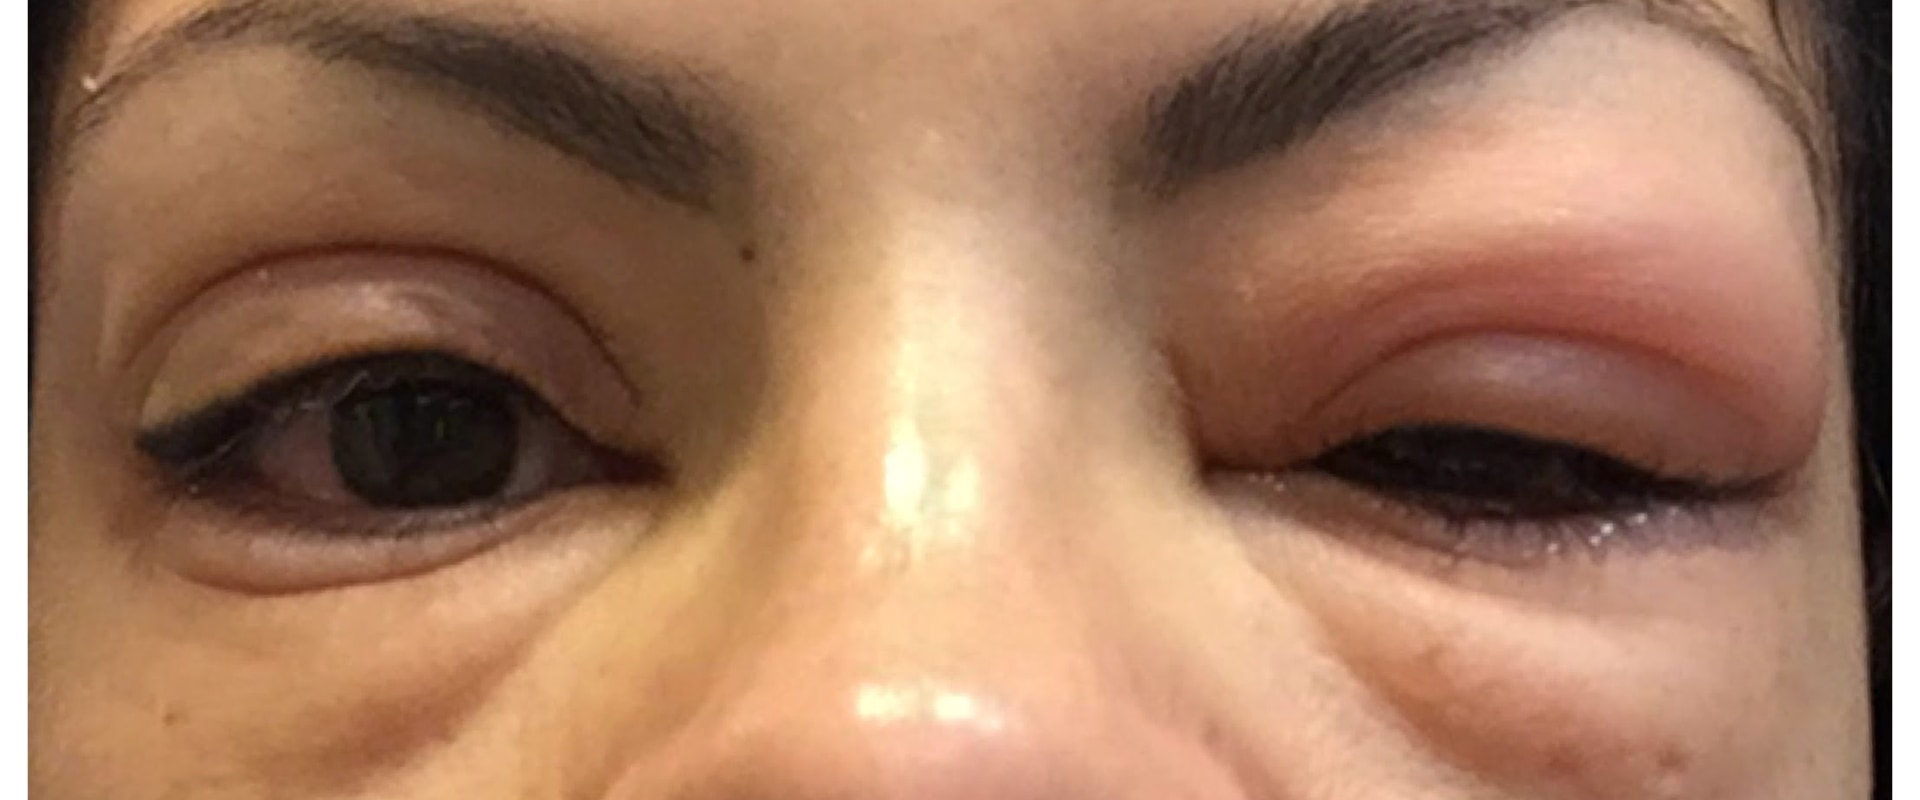 Can eyelash extensions give you an eye infection?